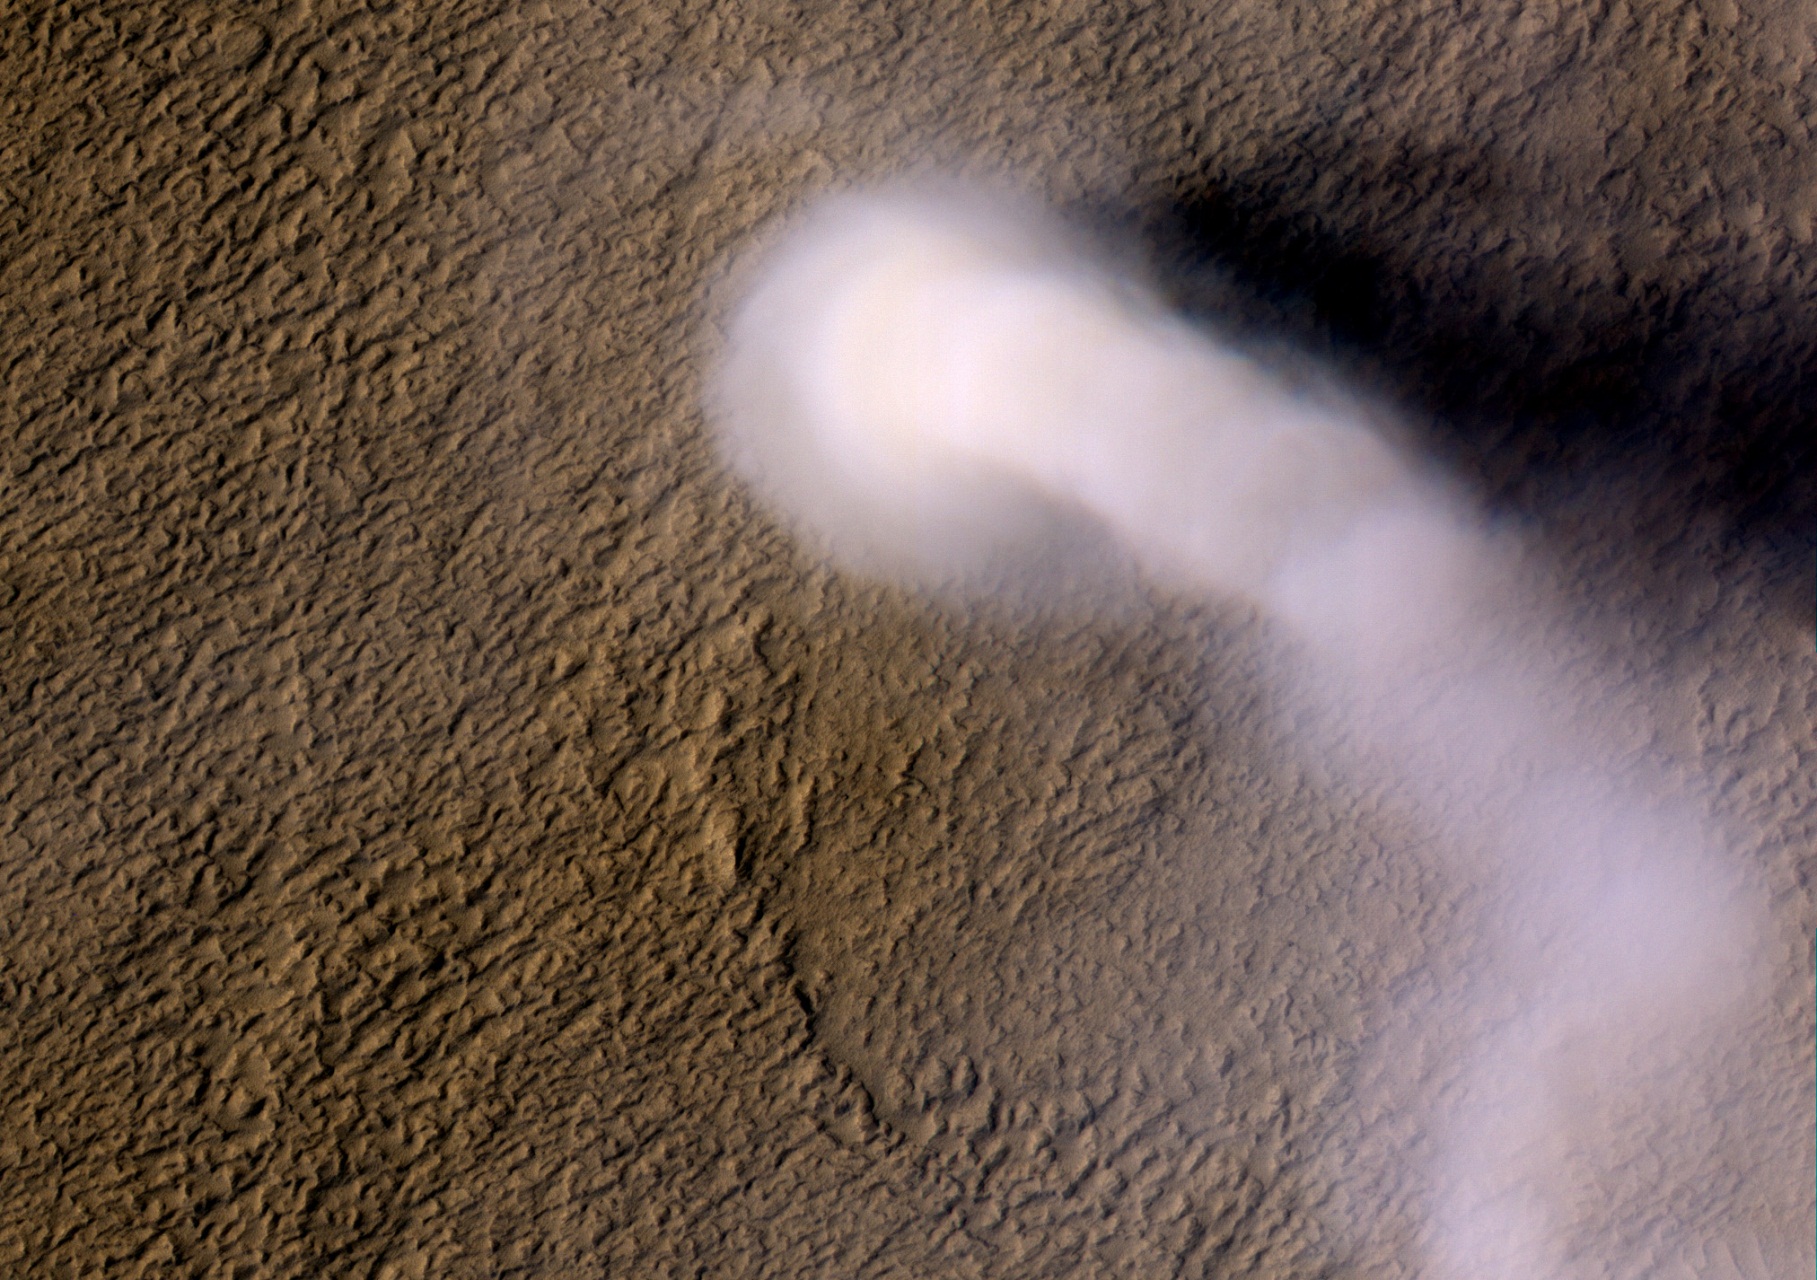 A Martian dust devil roughly 12 miles (20 kilometers) high was captured winding its way along the Amazonis Planitia region of Northern Mars on March 14, 2012 by the High Resolution Imaging Science Experiment (HiRISE) camera on NASA's Mars Reconnaissance Orbiter. Despite its height, the plume is little more than three-quarters of a football field wide (70 yards, or 70 meters). Image credit: NASA/JPL-Caltech/UA. Full Image and caption.